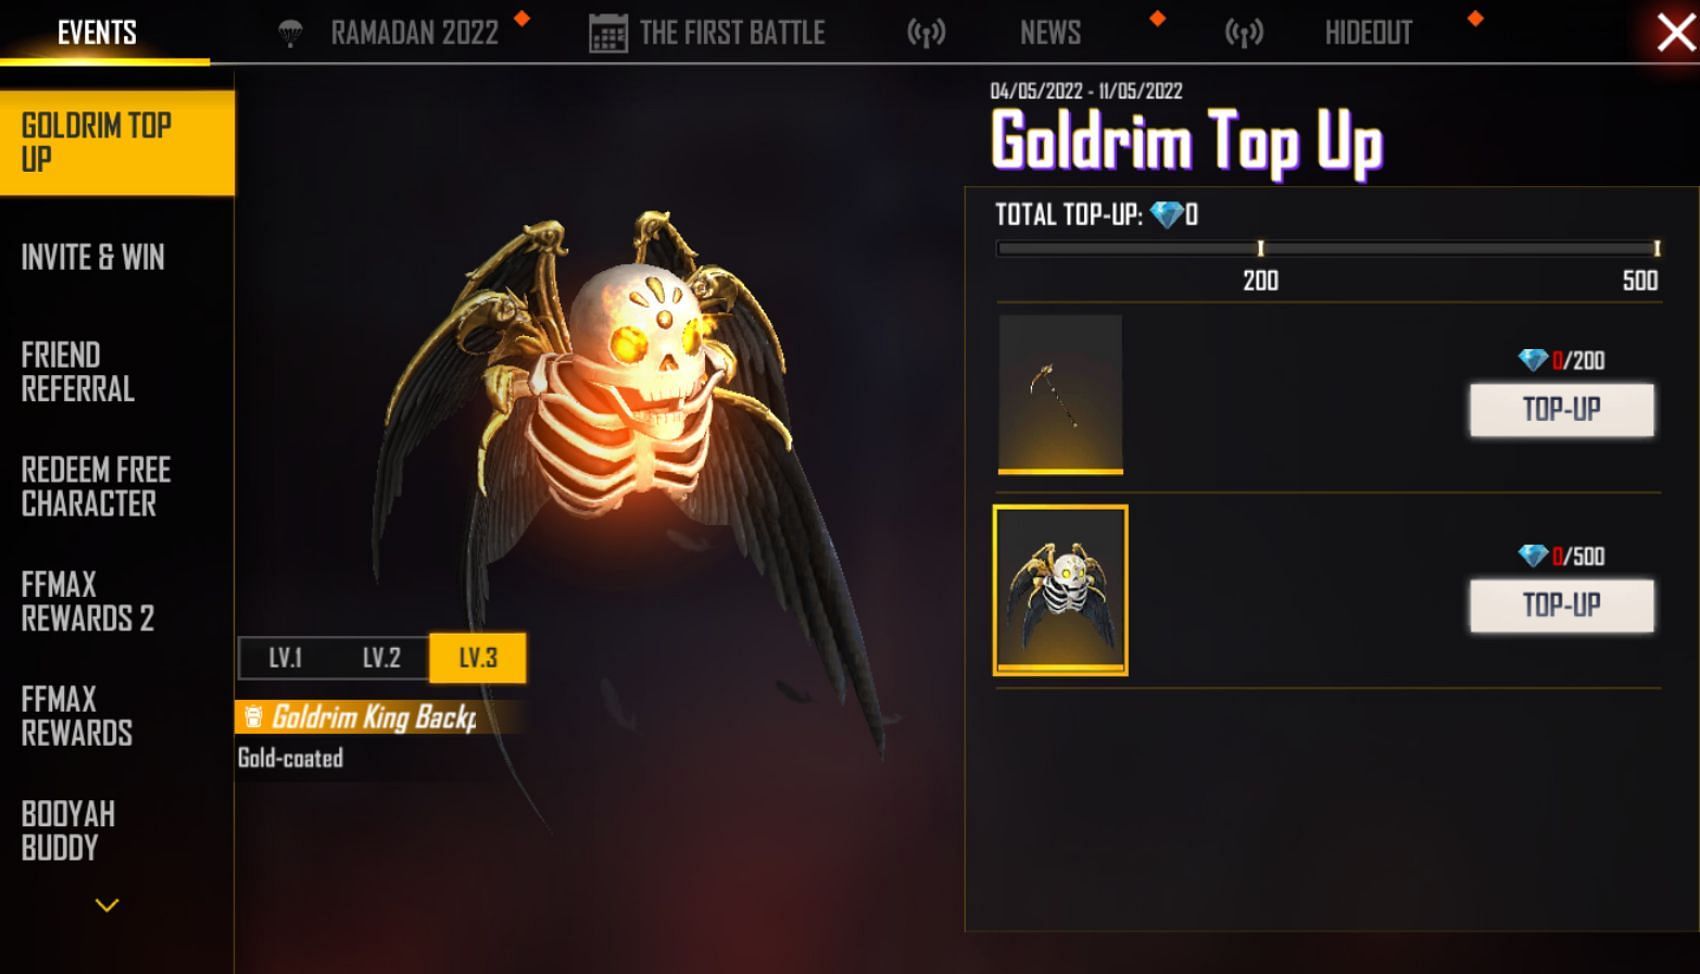 There are two legendary rewards featured in the top-up event (Image via Garena)